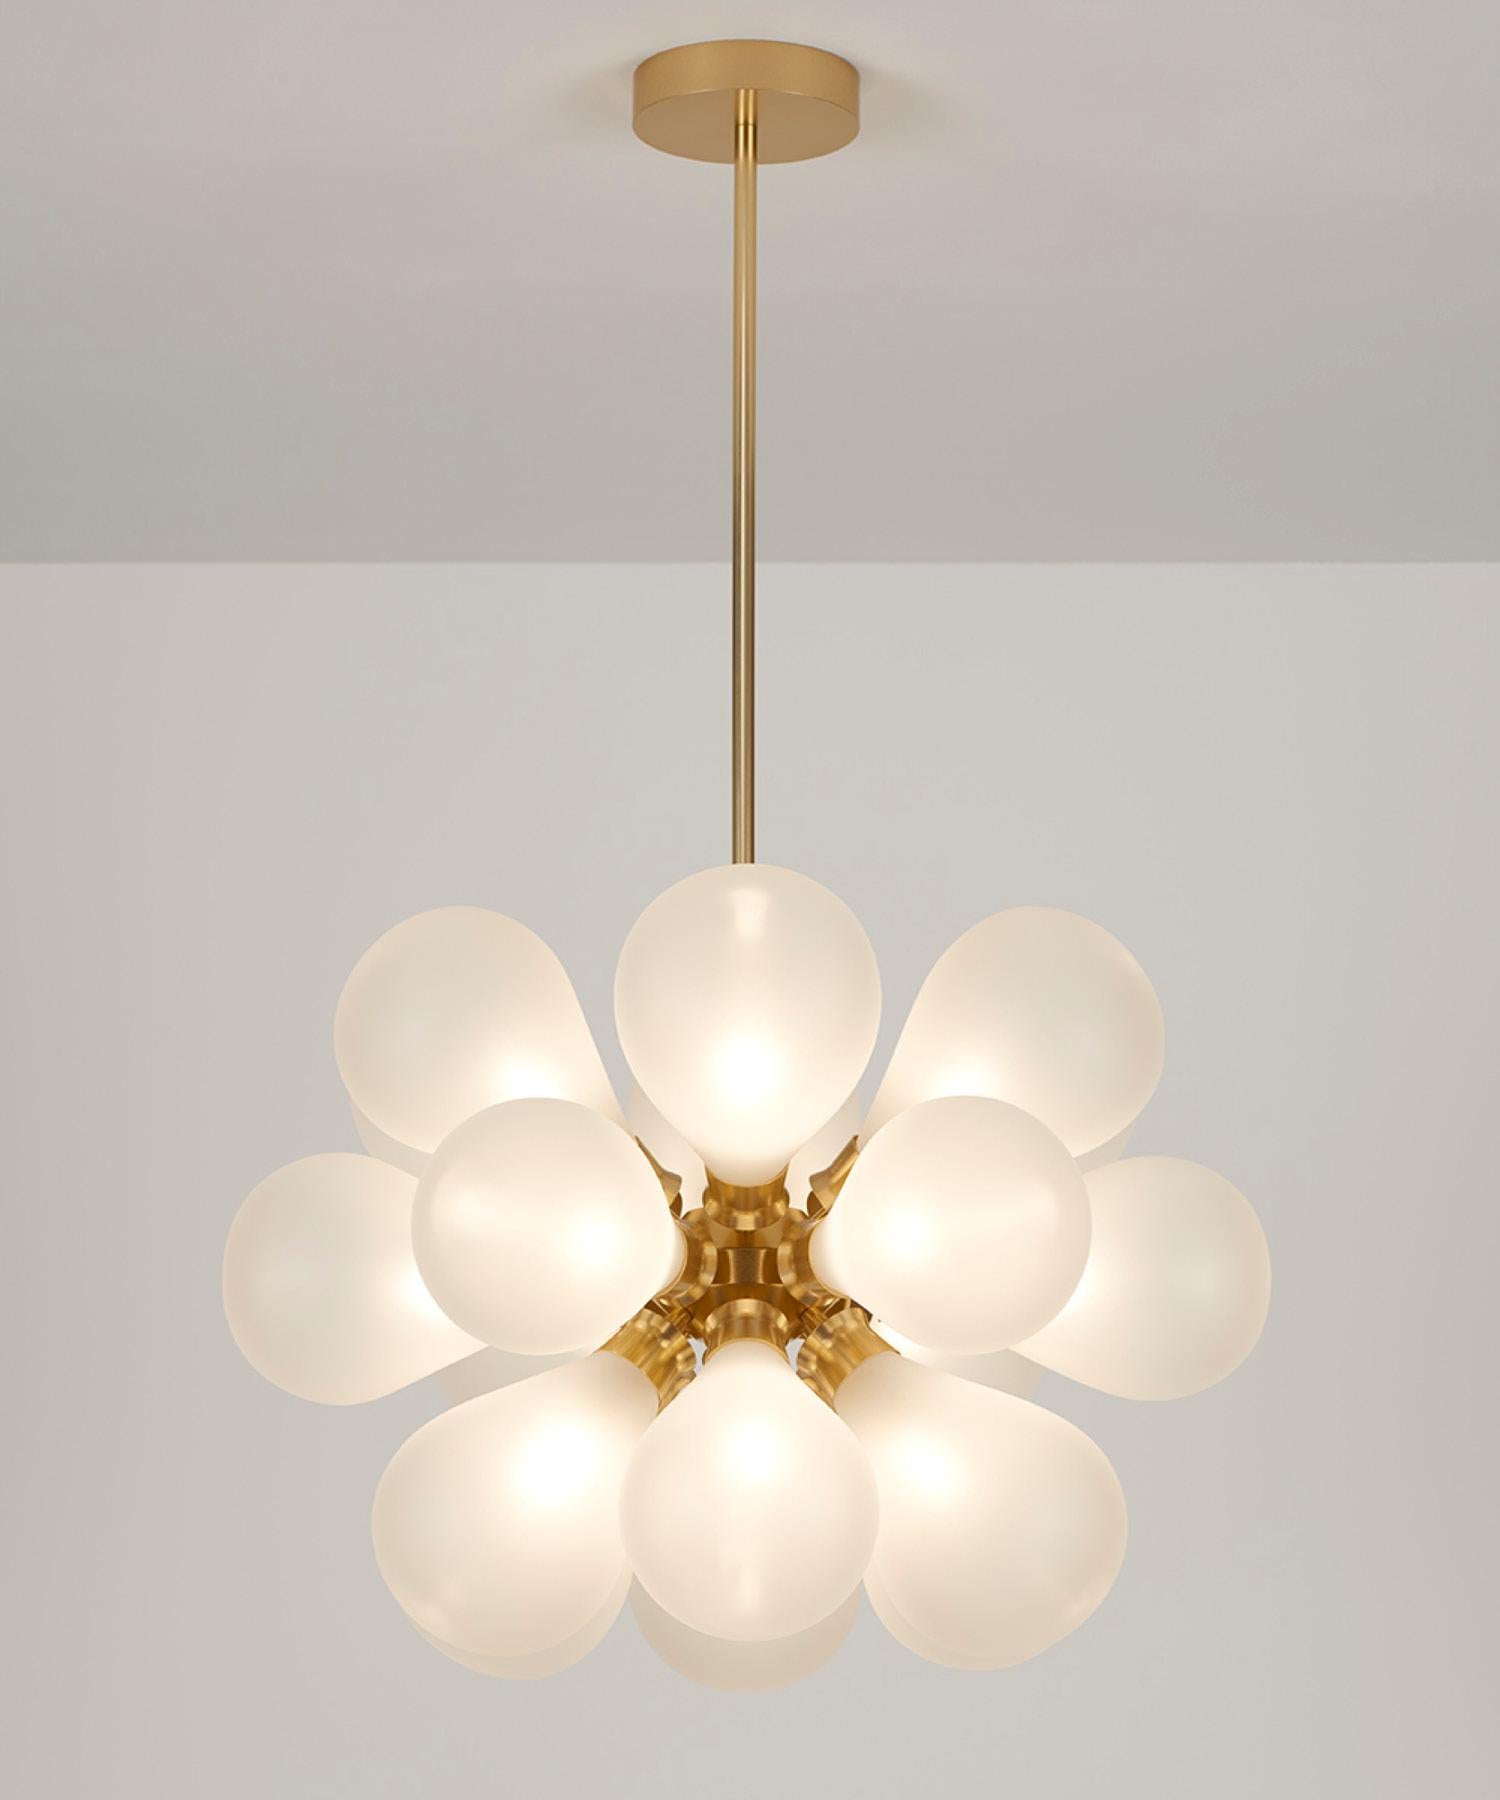 British Cintola Maxi Pendant in Satin Gold with 18 Handblown Frosted Glass Globes For Sale